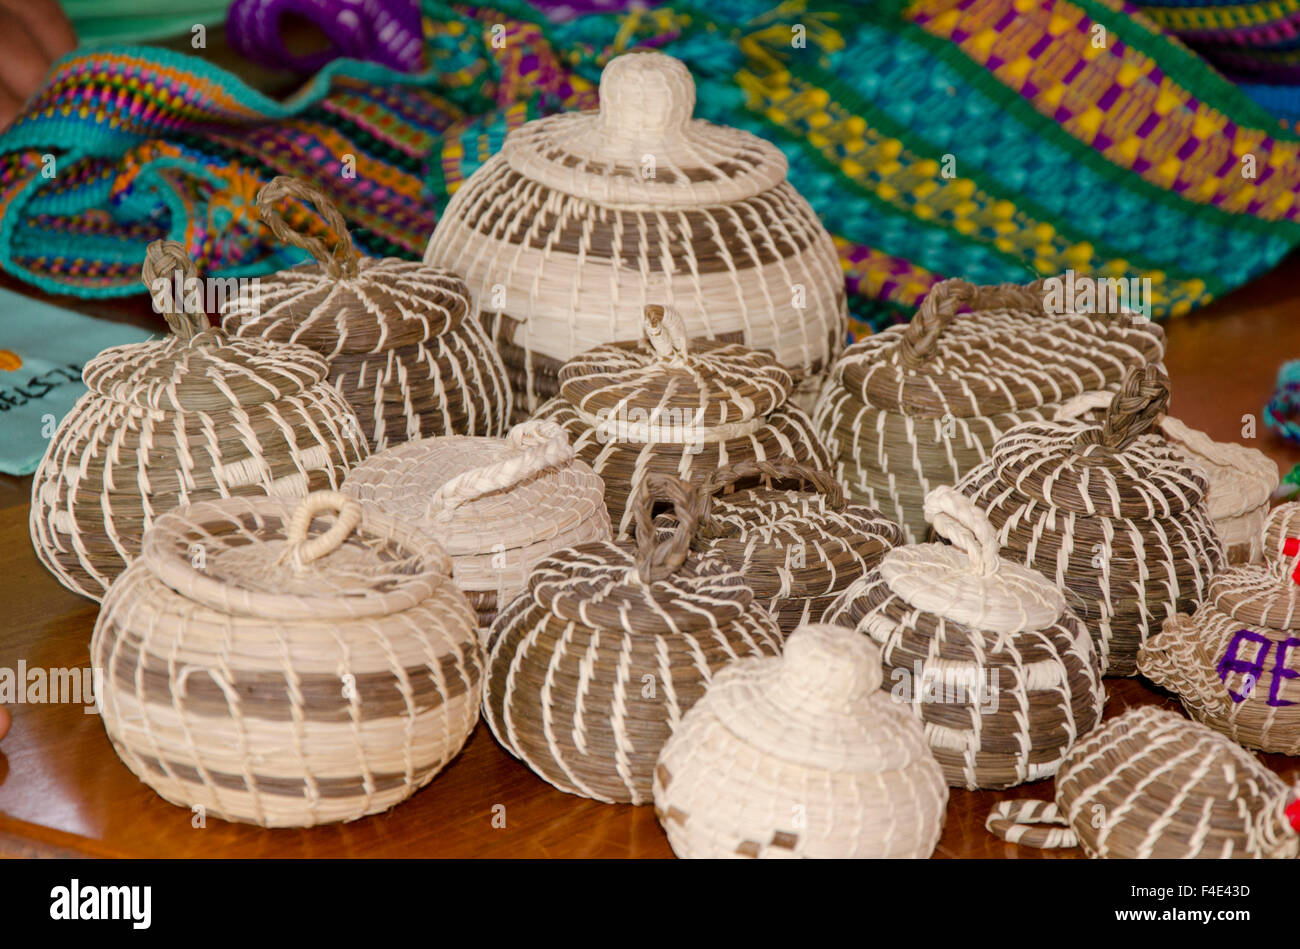 Collectible Belize, Punta Gorda, Columbia. Agouti Cacao Farm. Traditional Belize handmade grass baskets with lids. Stock Photo